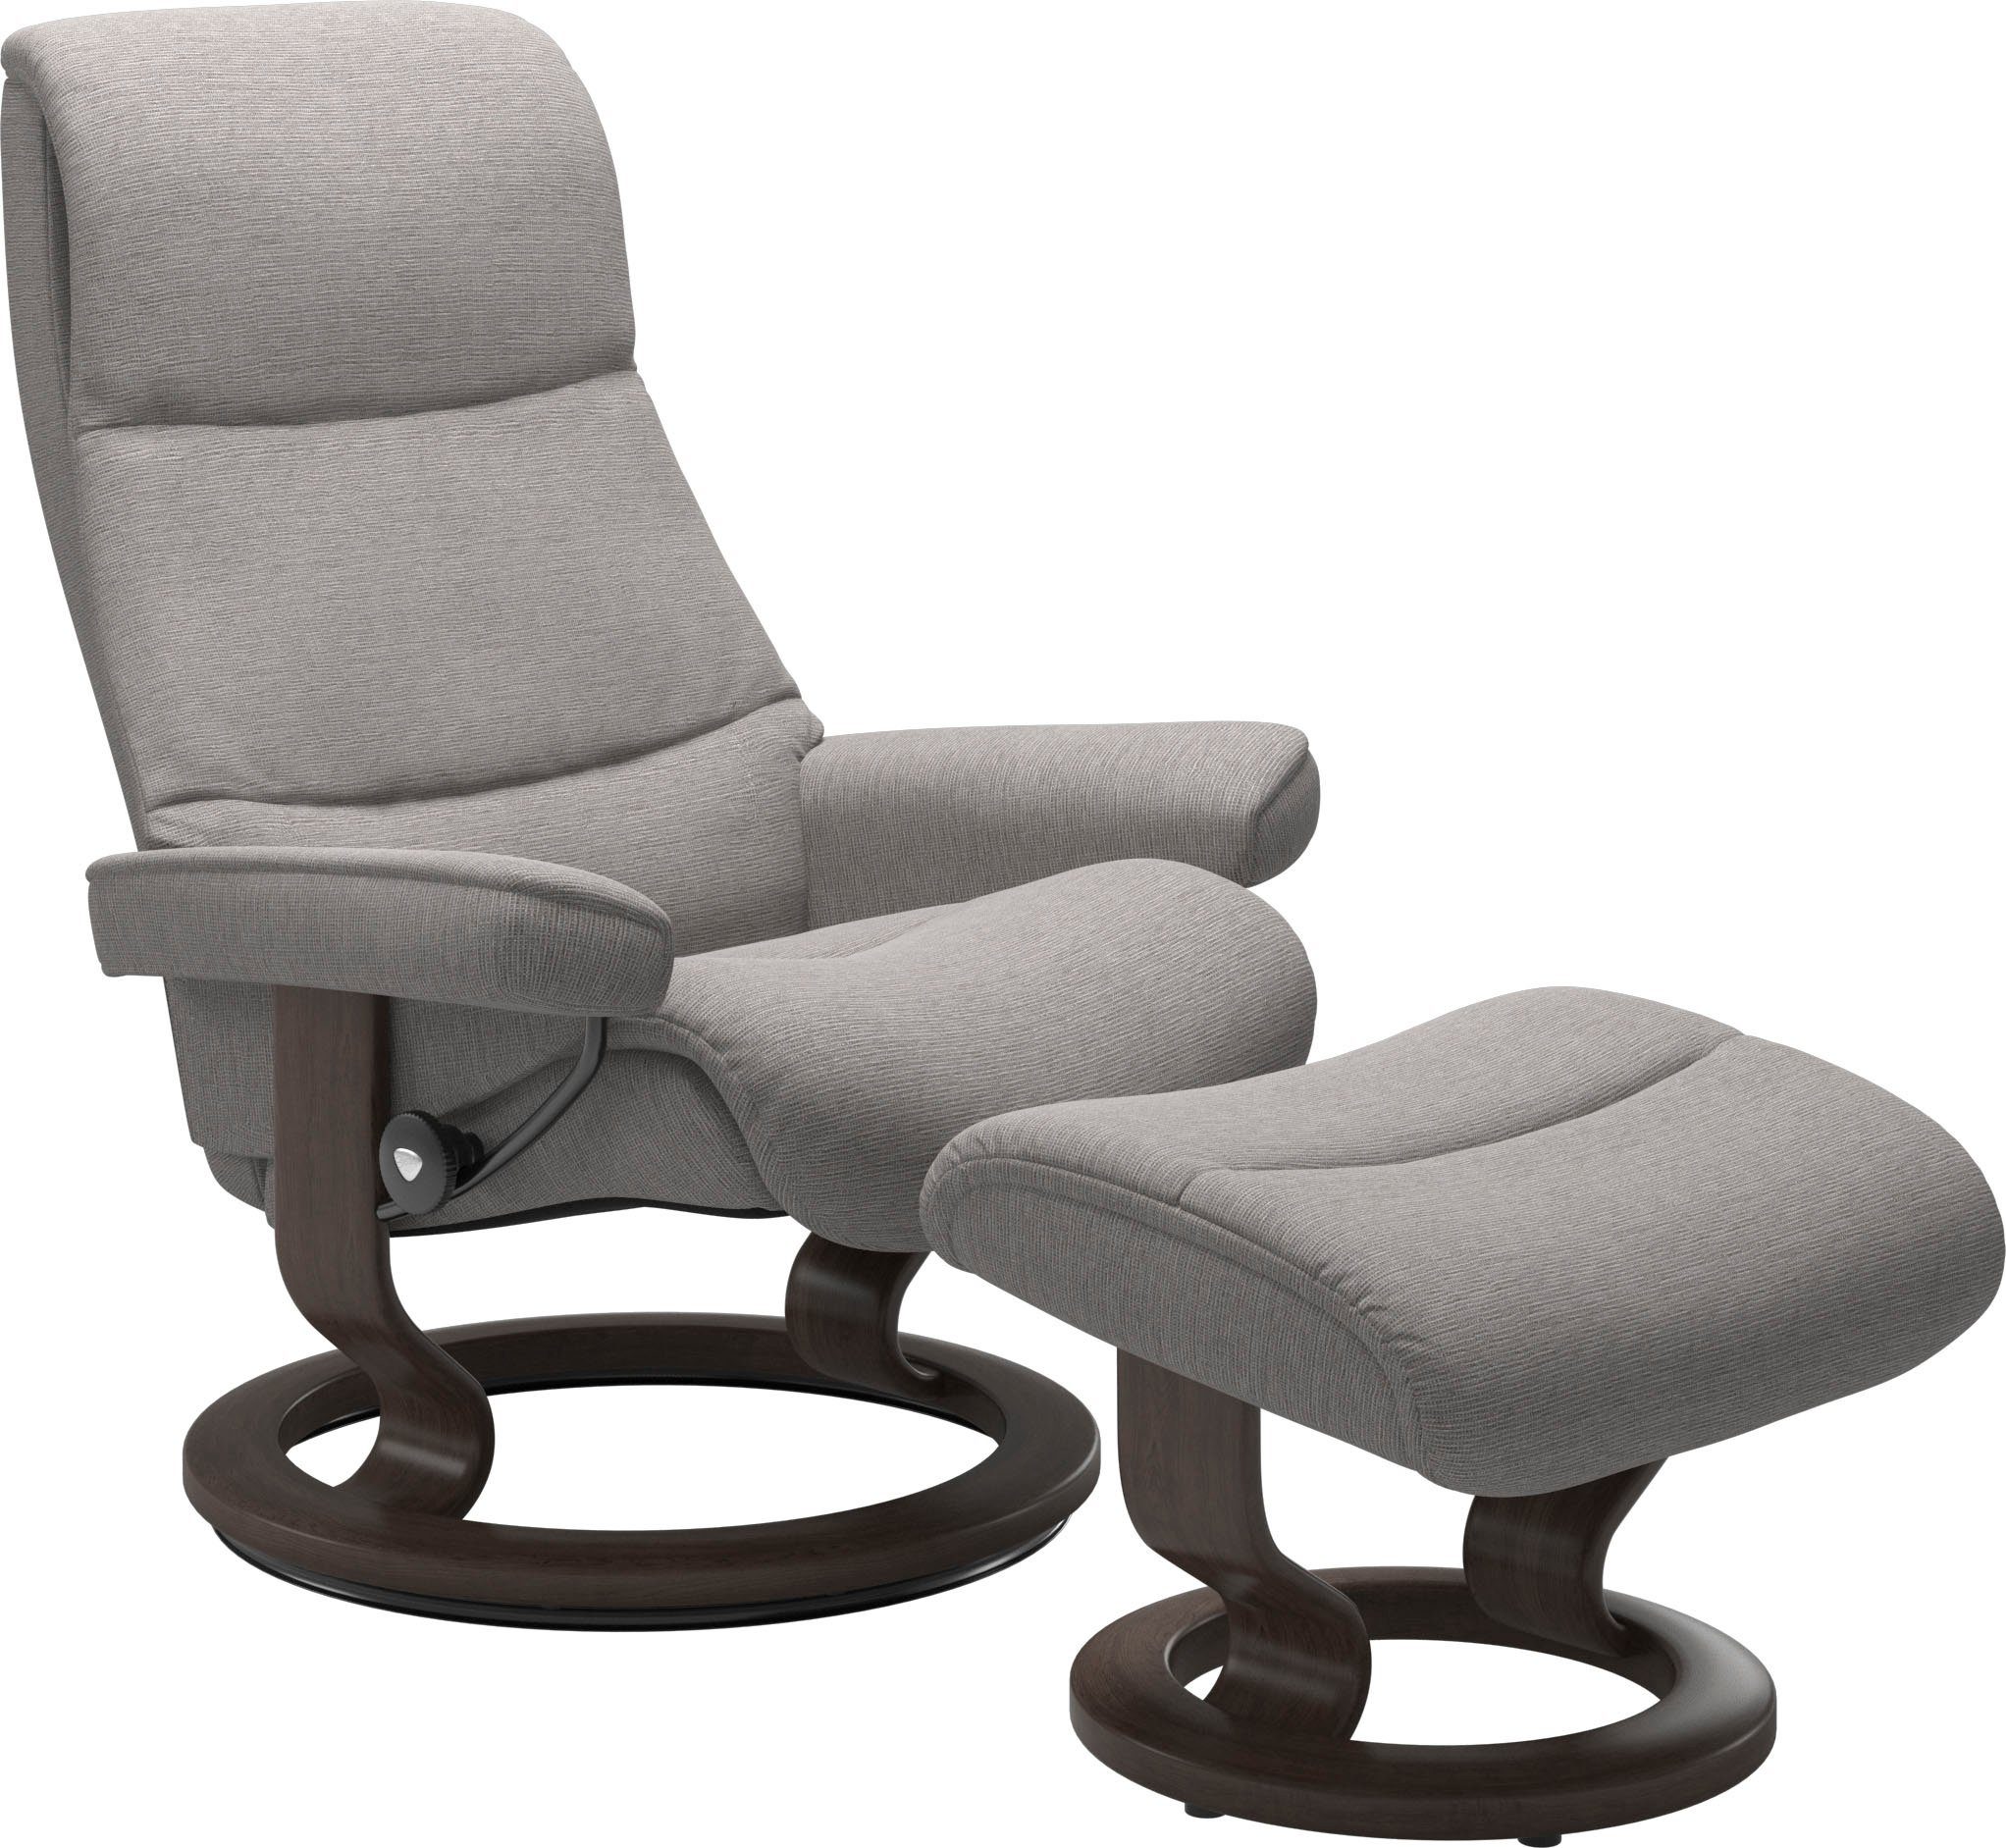 Stressless® Relaxsessel View, mit Classic Wenge Base, Größe L,Gestell